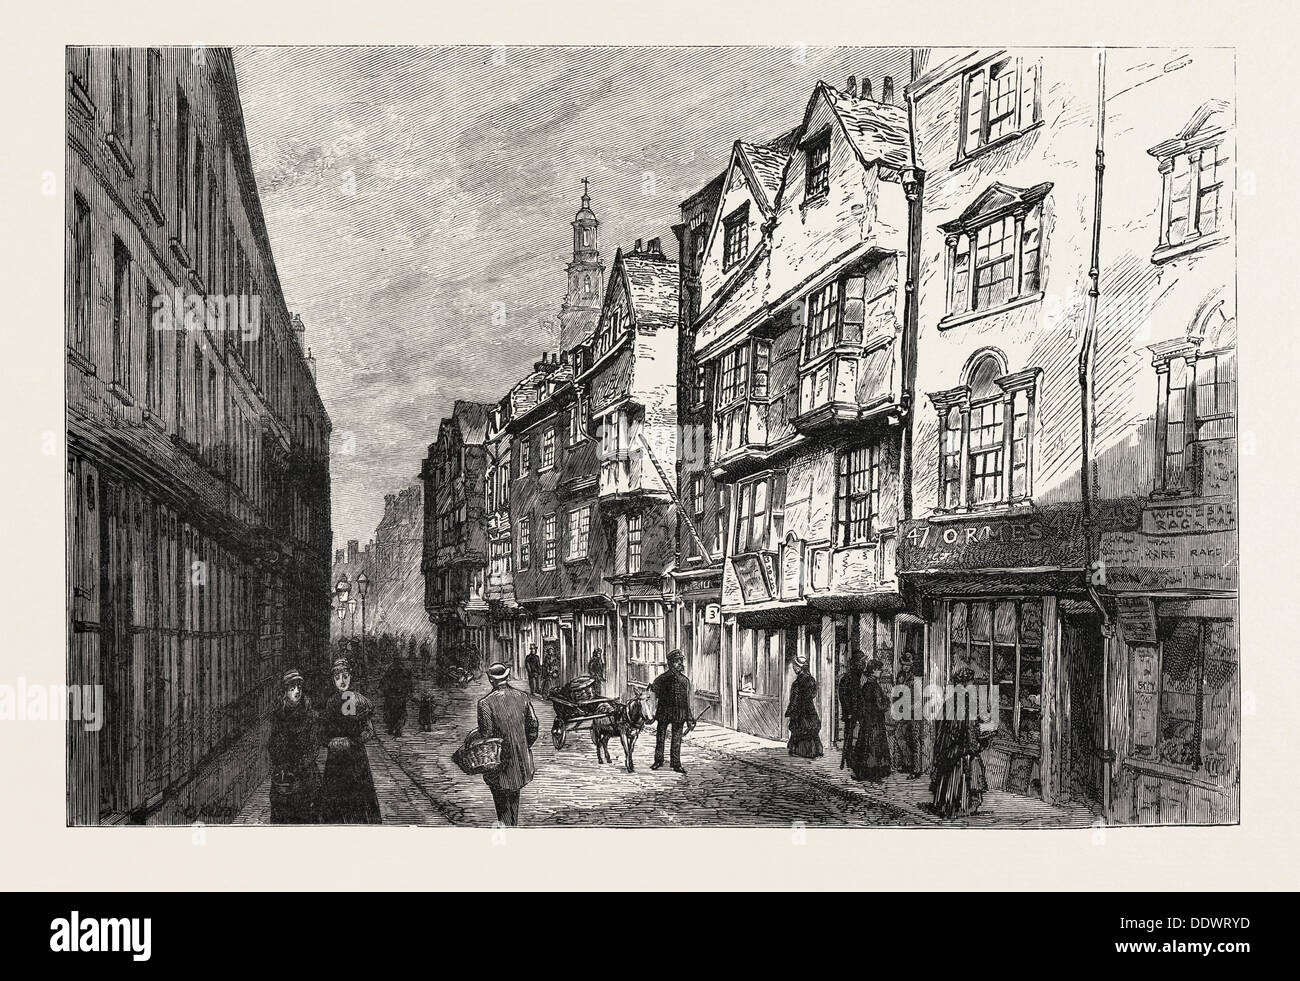 OLD HOUSES IN WYCH STREET, LONDON, DEMOLISHED, engraving 1884, UK, britain, british, europe, united kingdom, great britain Stock Photo